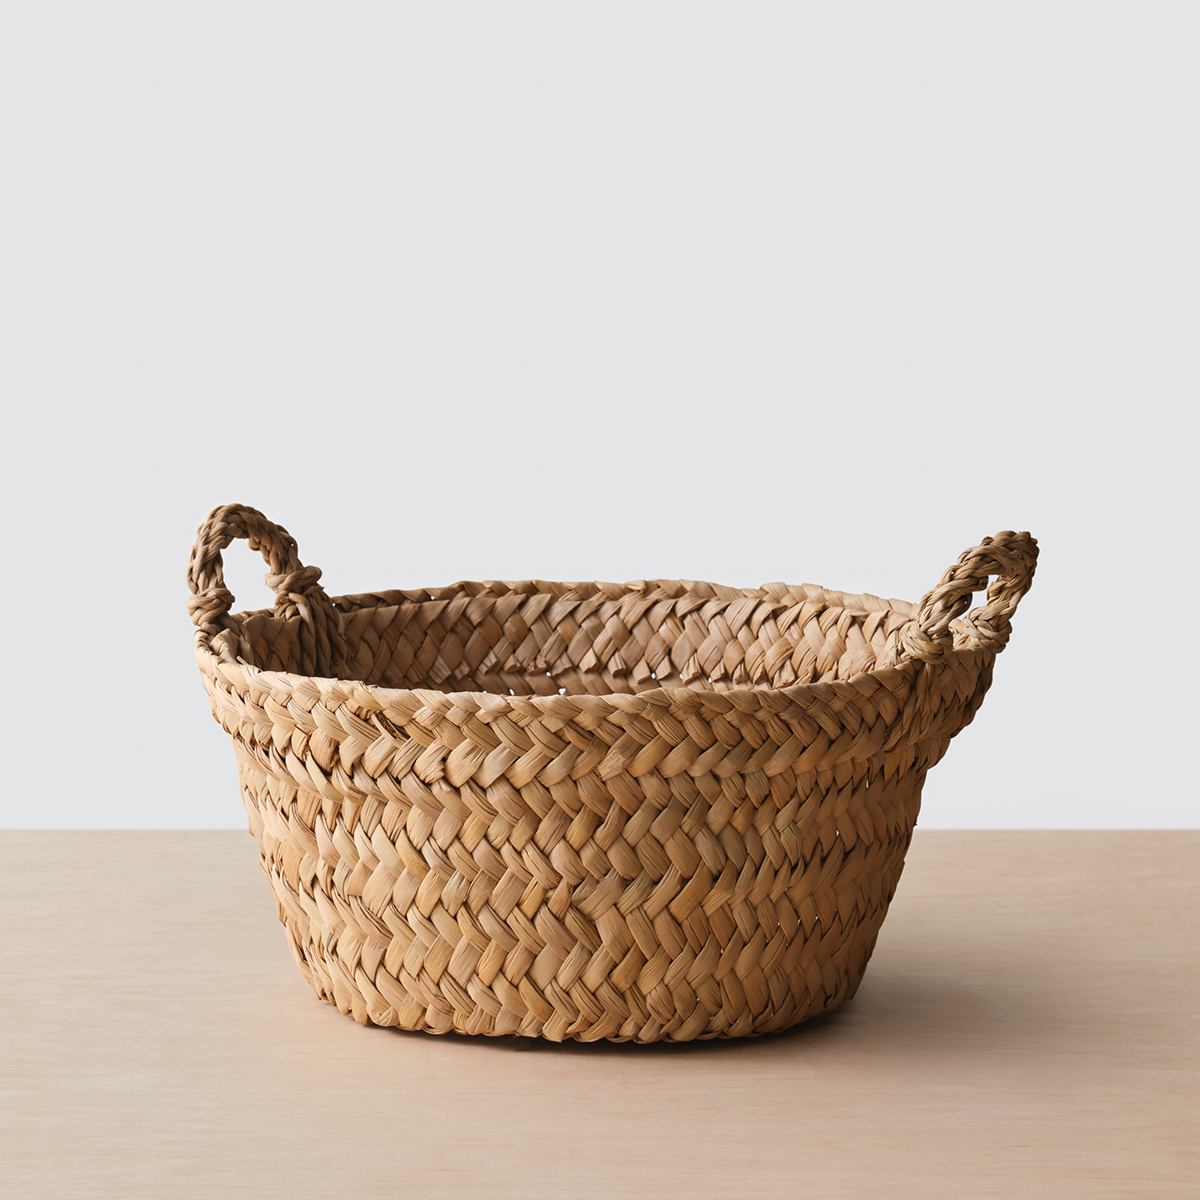 https://www.containerstore.com/catalogimages/502695/10096706-Totora_Floor_Basket_Small_1.jpg